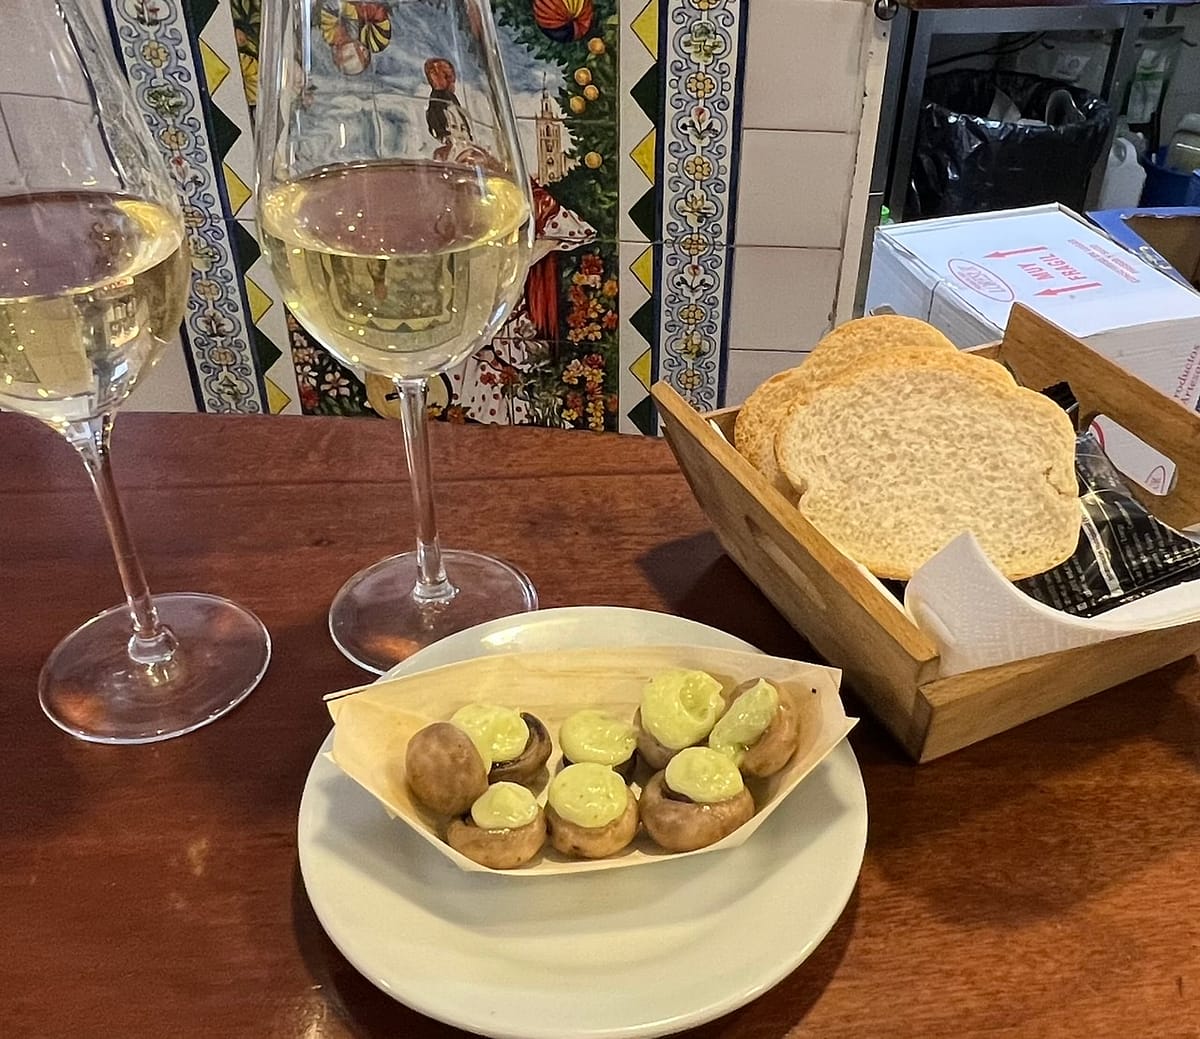 A tapas of mushrooms and aioli served with glasses of manzanilla sherry in Seville Spain